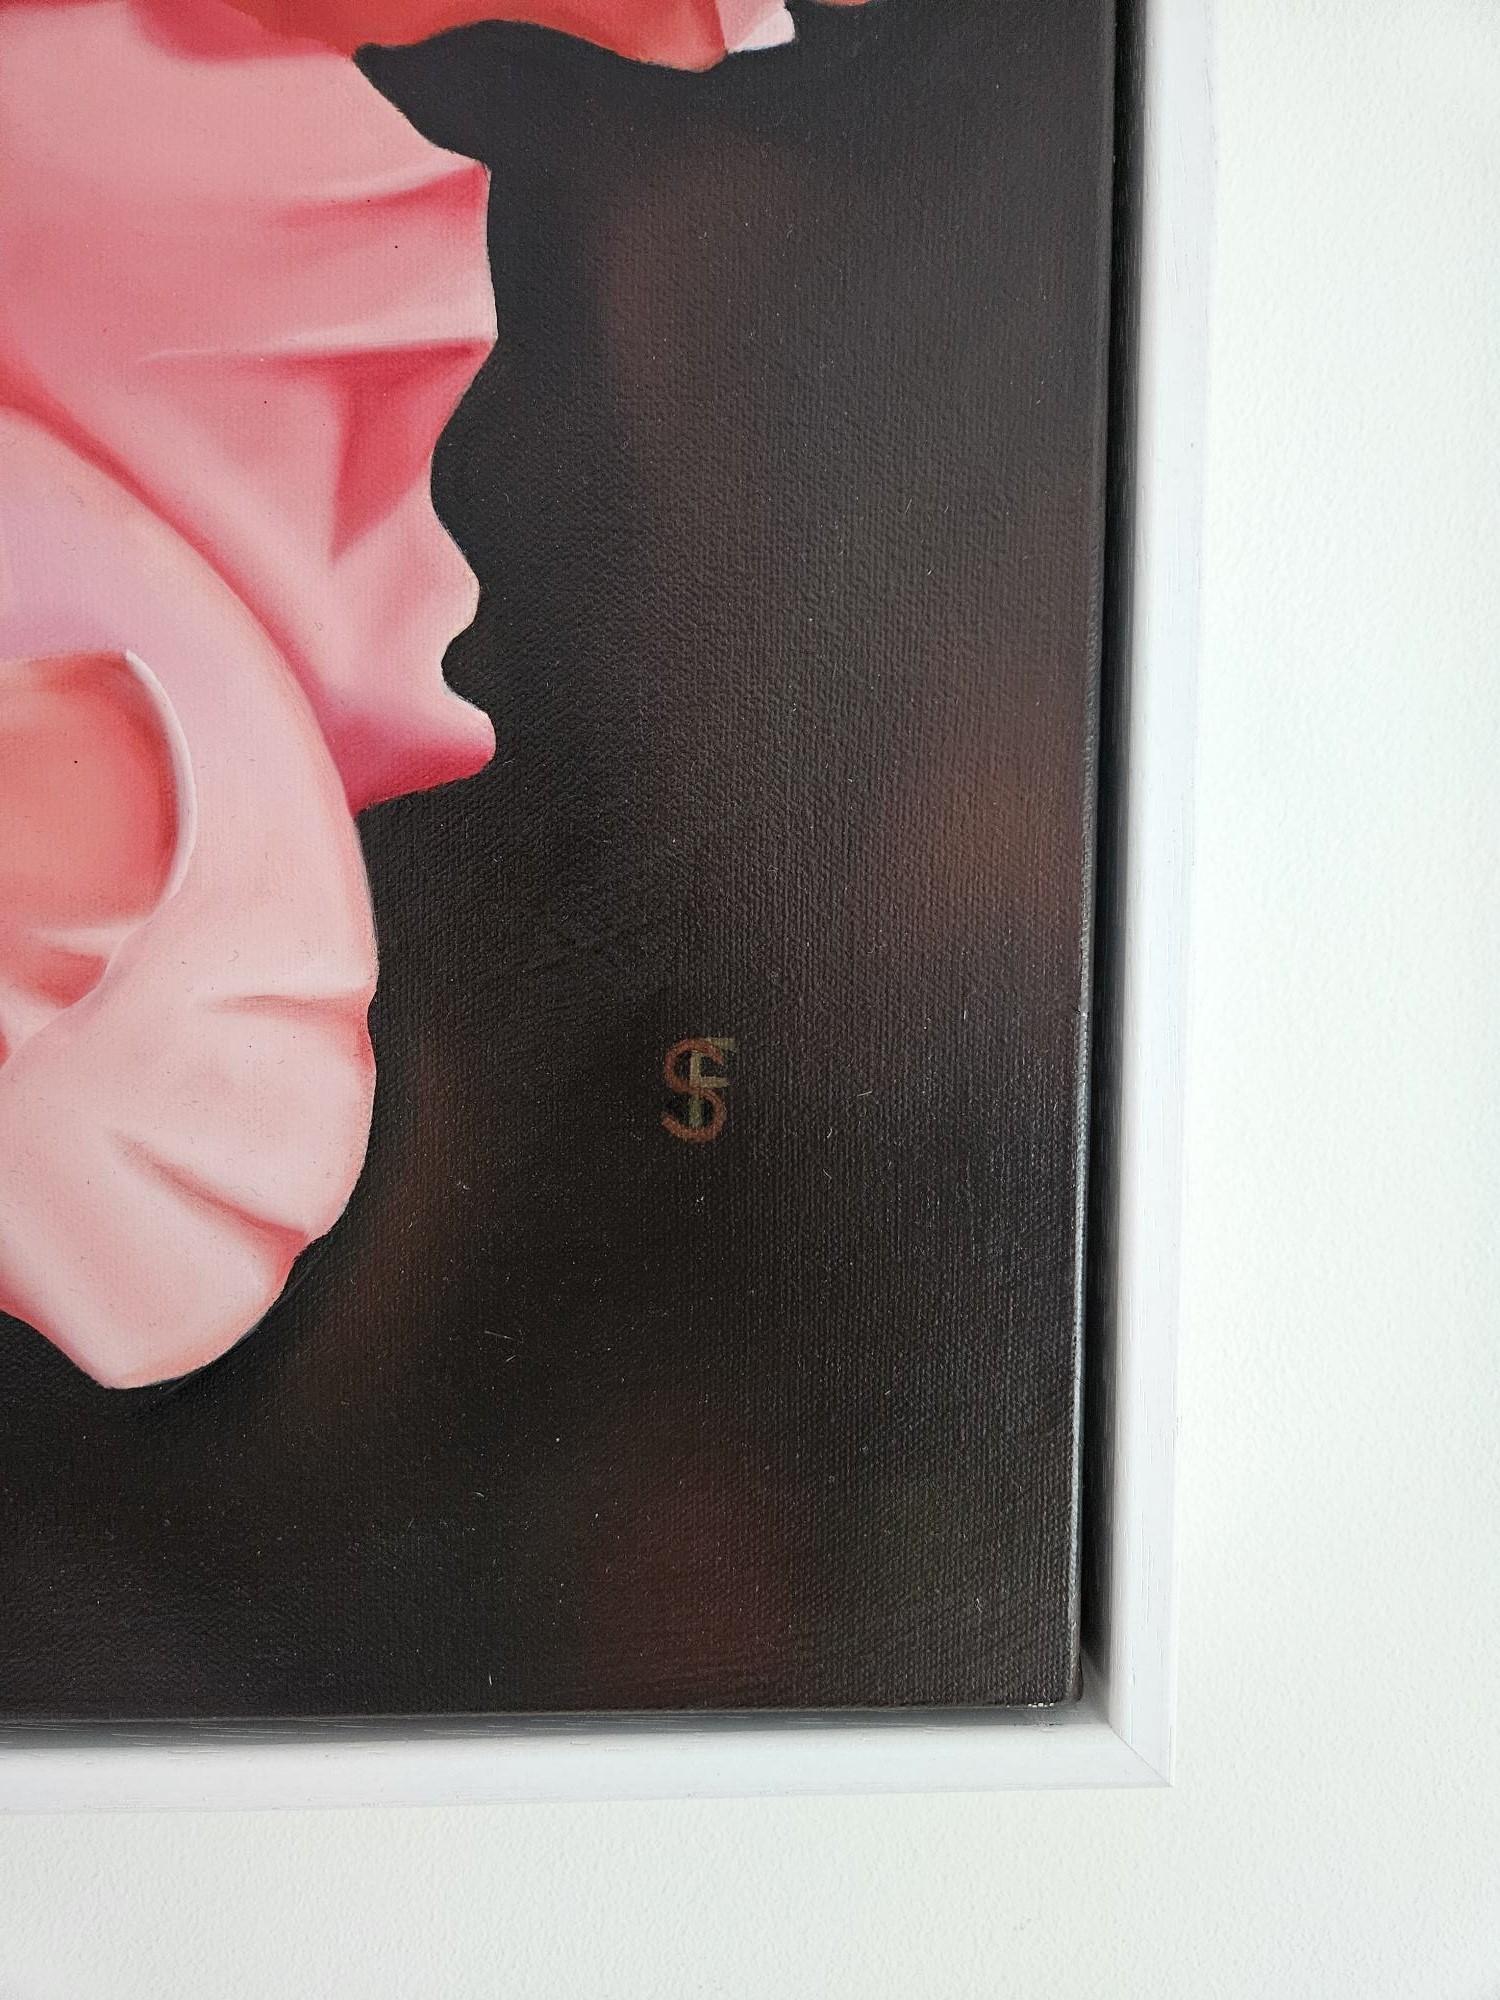 Tuti Fruiti - contemporary hyperrealistic flower rose oil painting For Sale 1